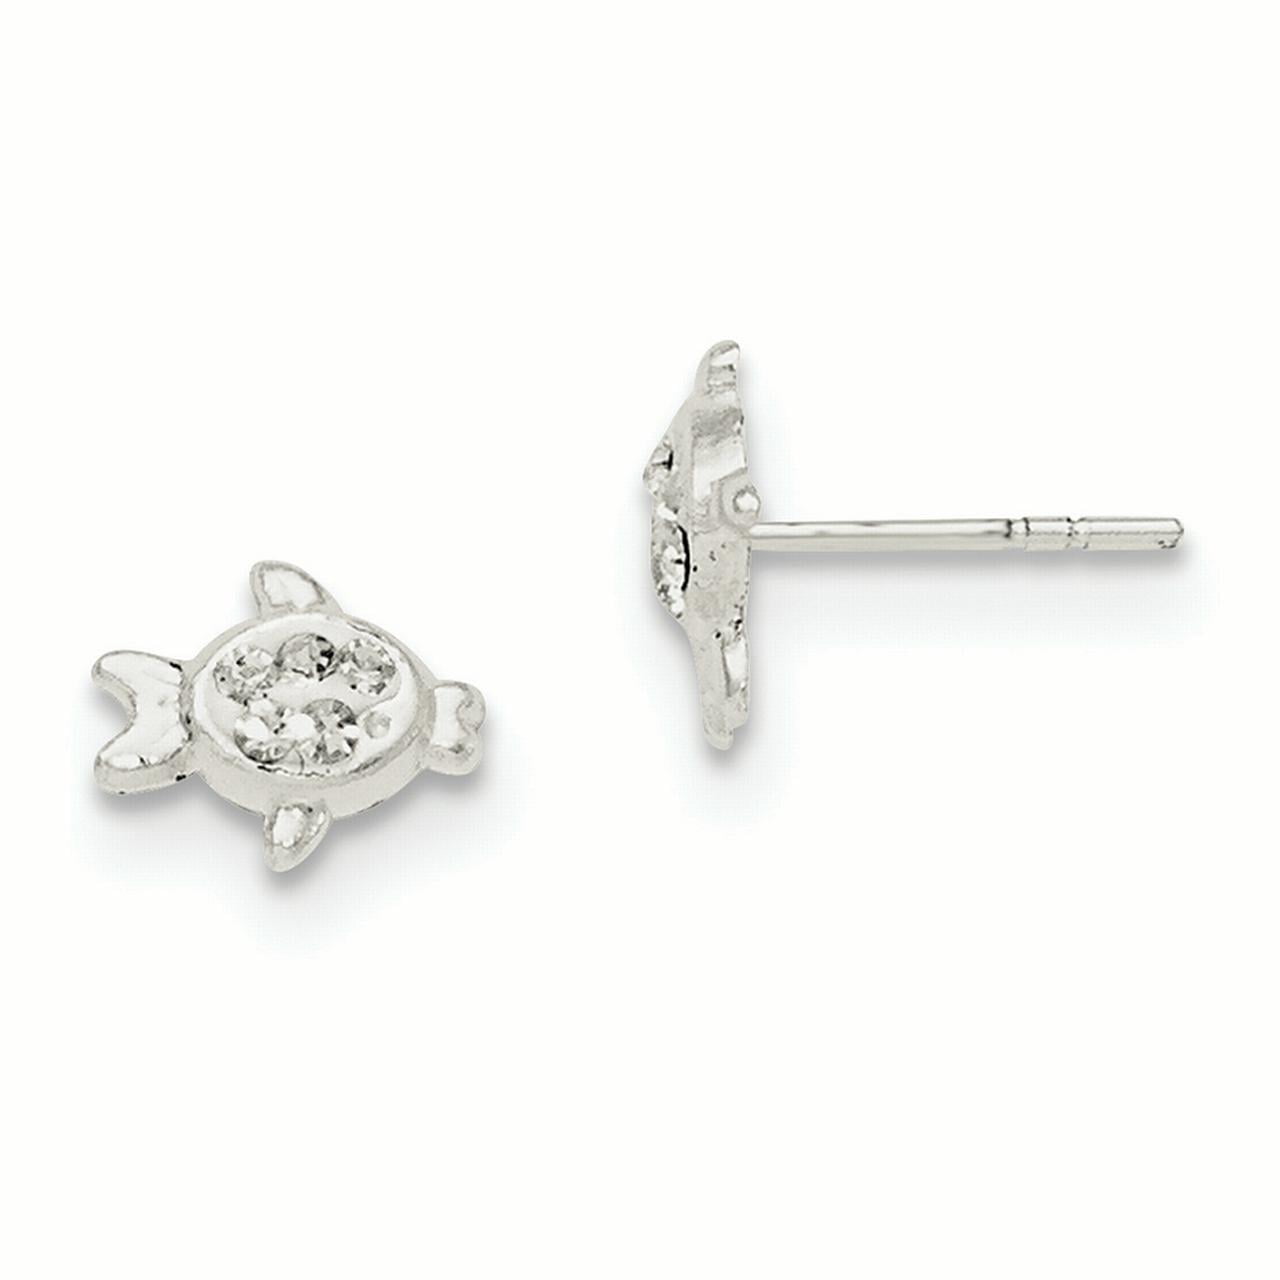 Details about   .925 Sterling Silver 9 MM Children's Enameled Happy Face Stud Earrings MSRP $44 